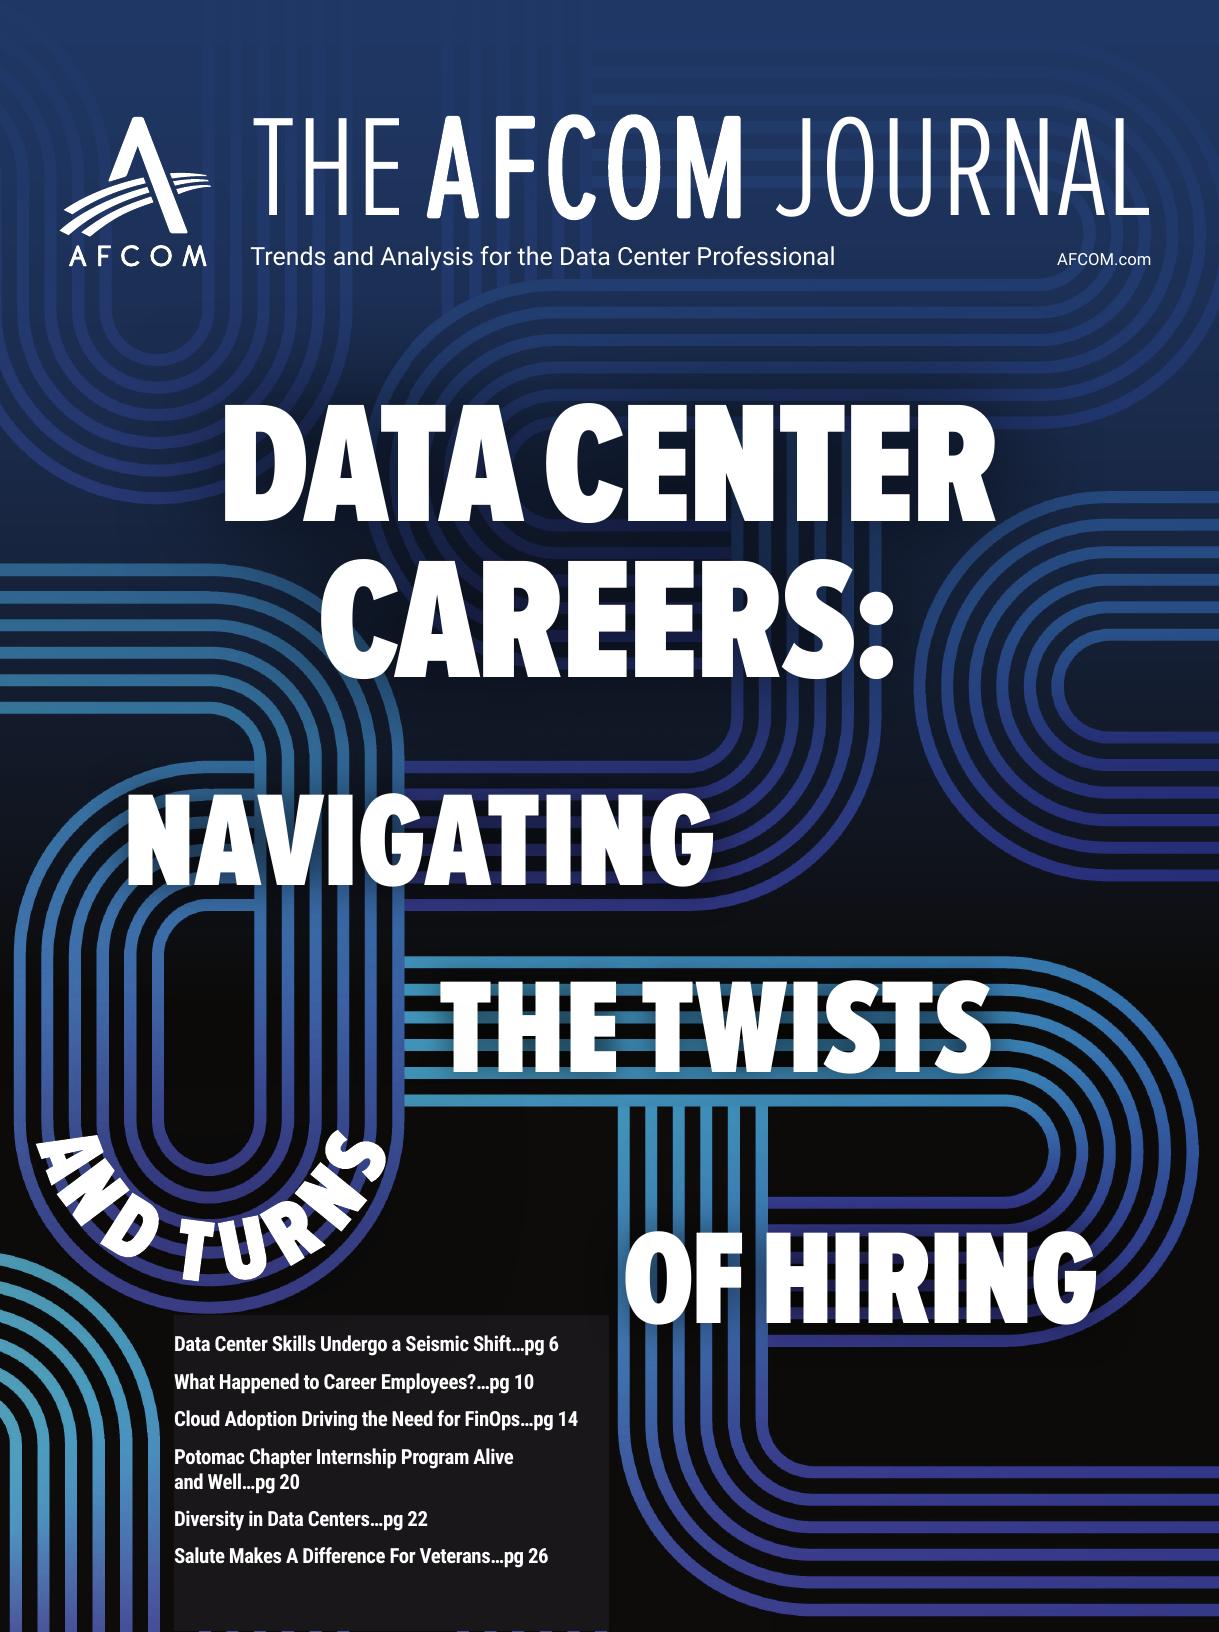 Data Center Careers - Navigating the Twists & Turns of Hiring